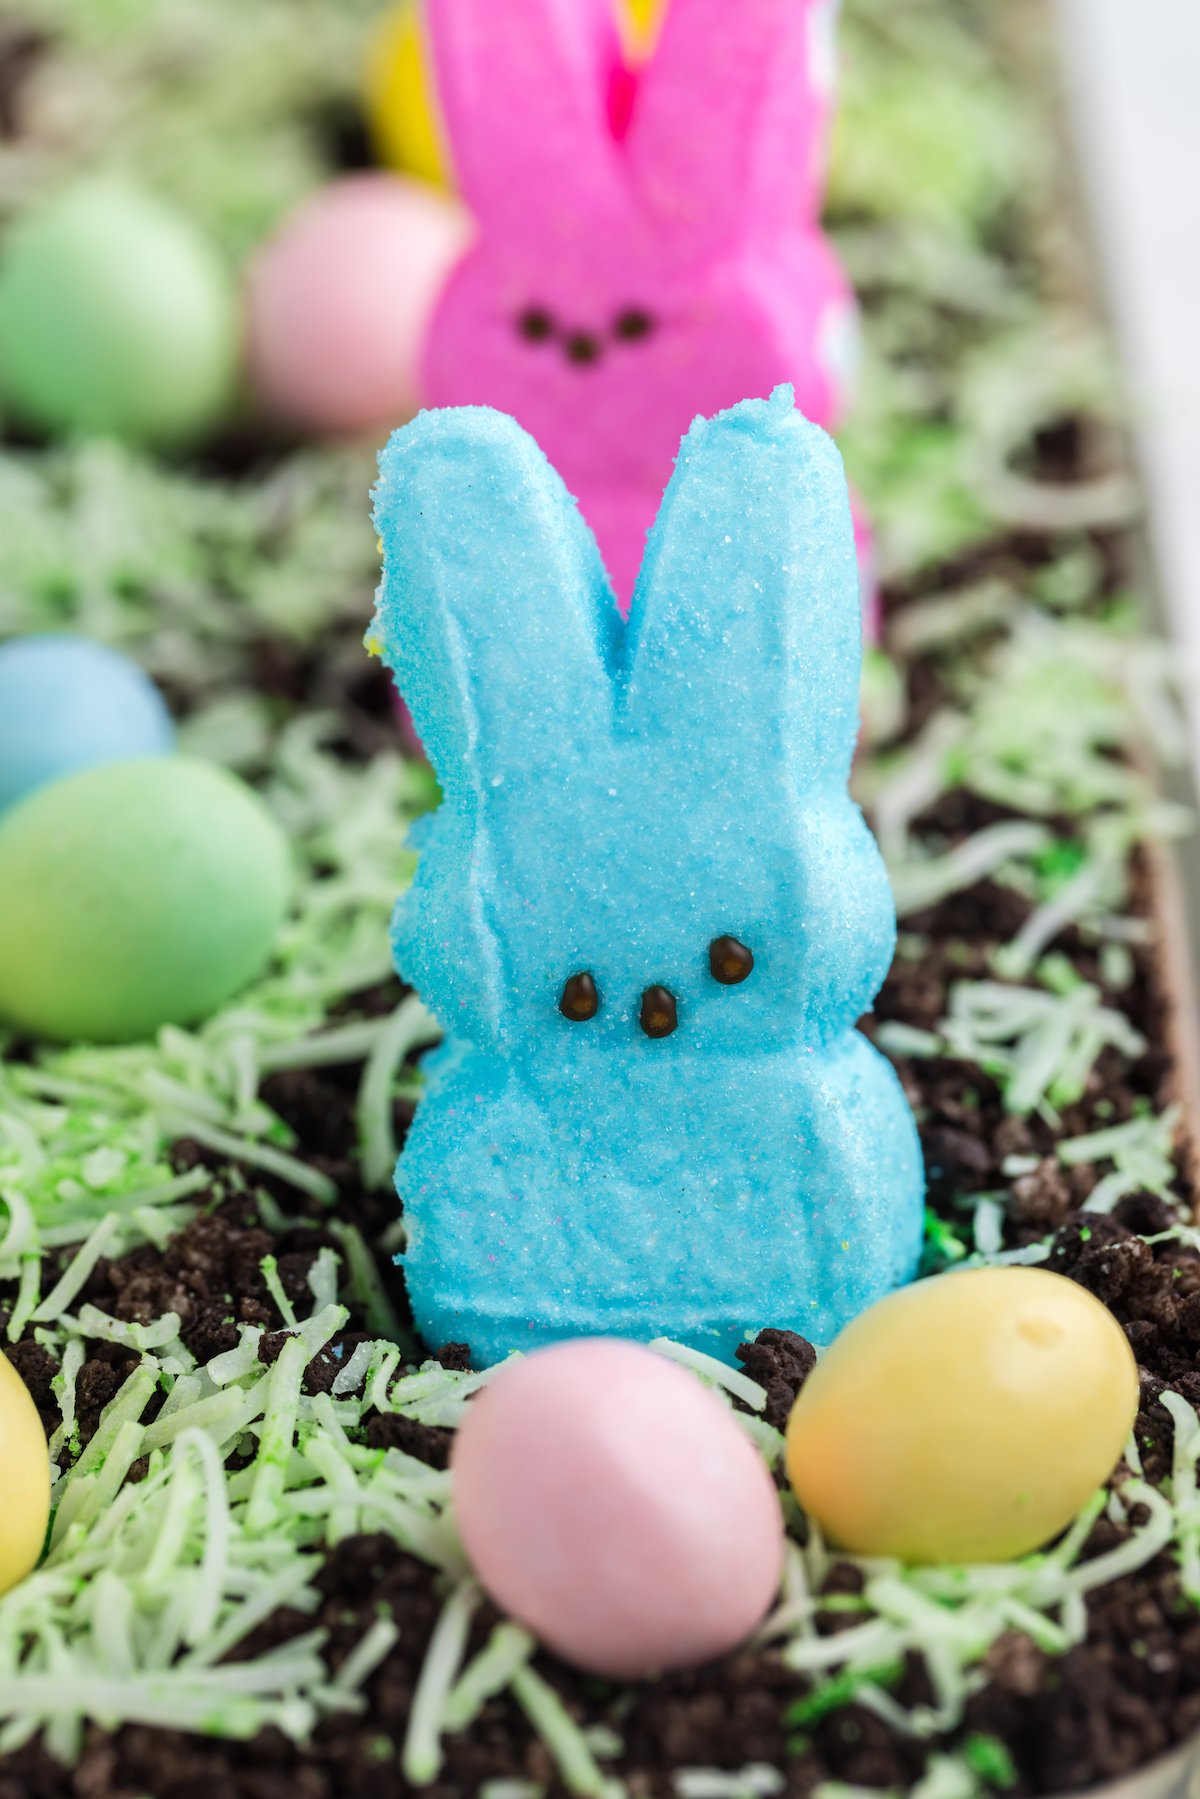 Super up close view of a blue marshmallow peeps and candy eggs on a dirt cake.